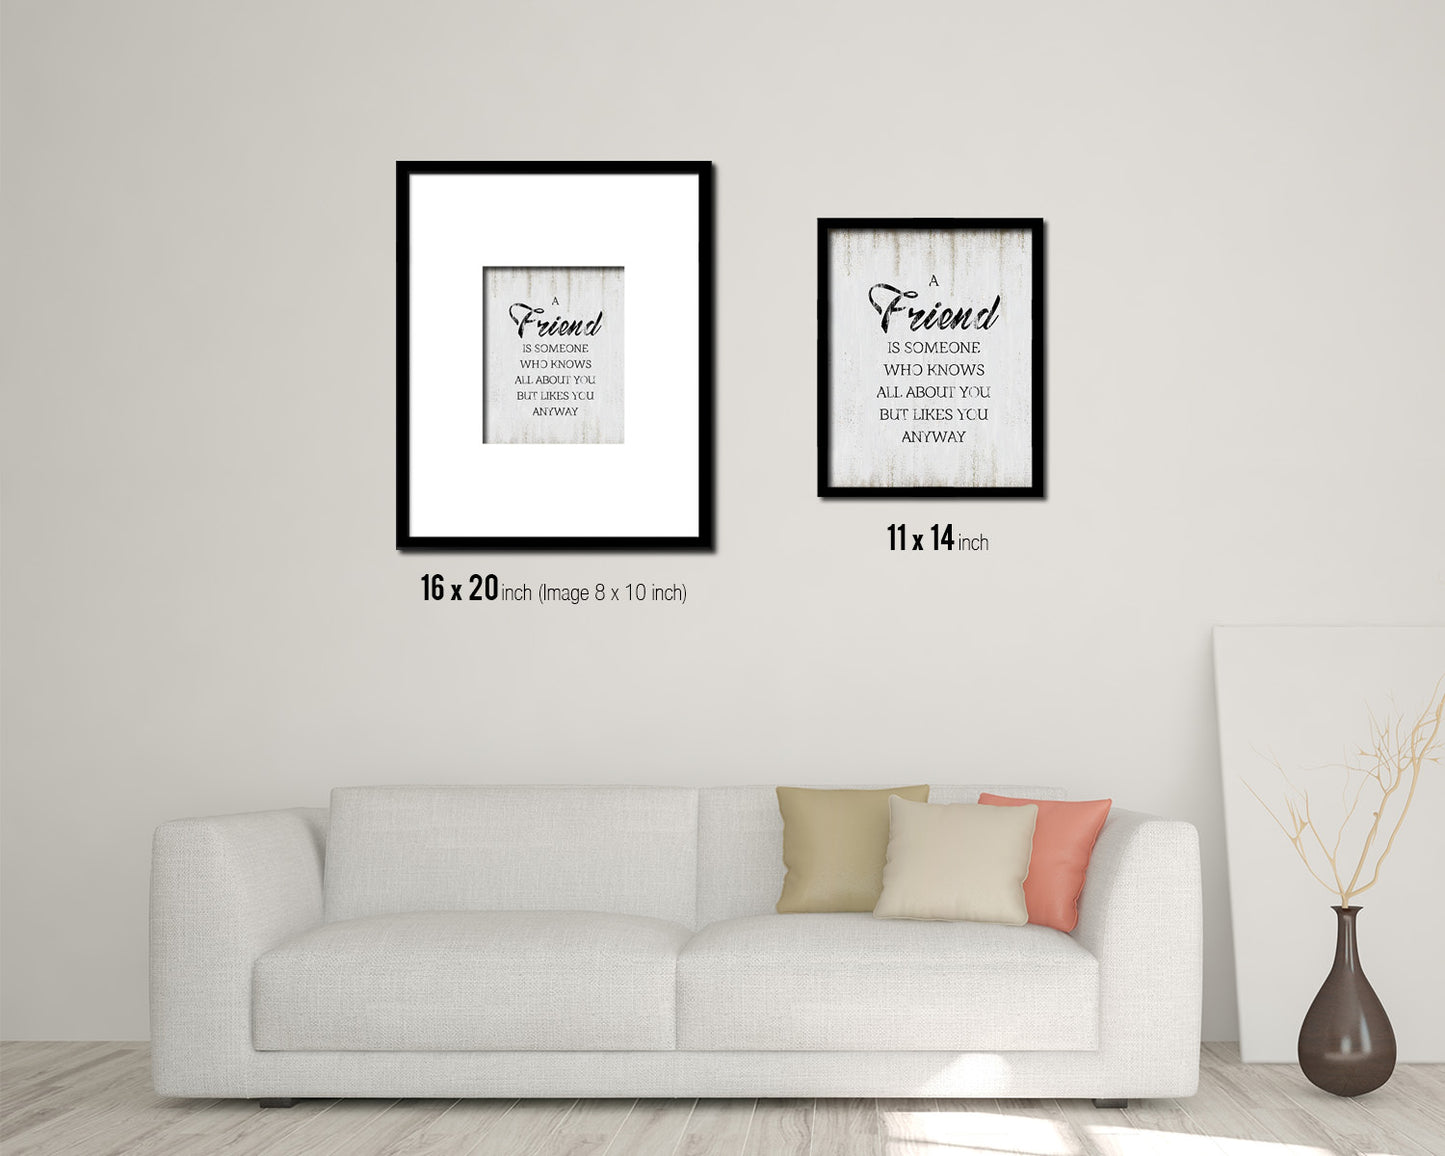 A friend is someone who knows all Quote Wood Framed Print Wall Decor Art